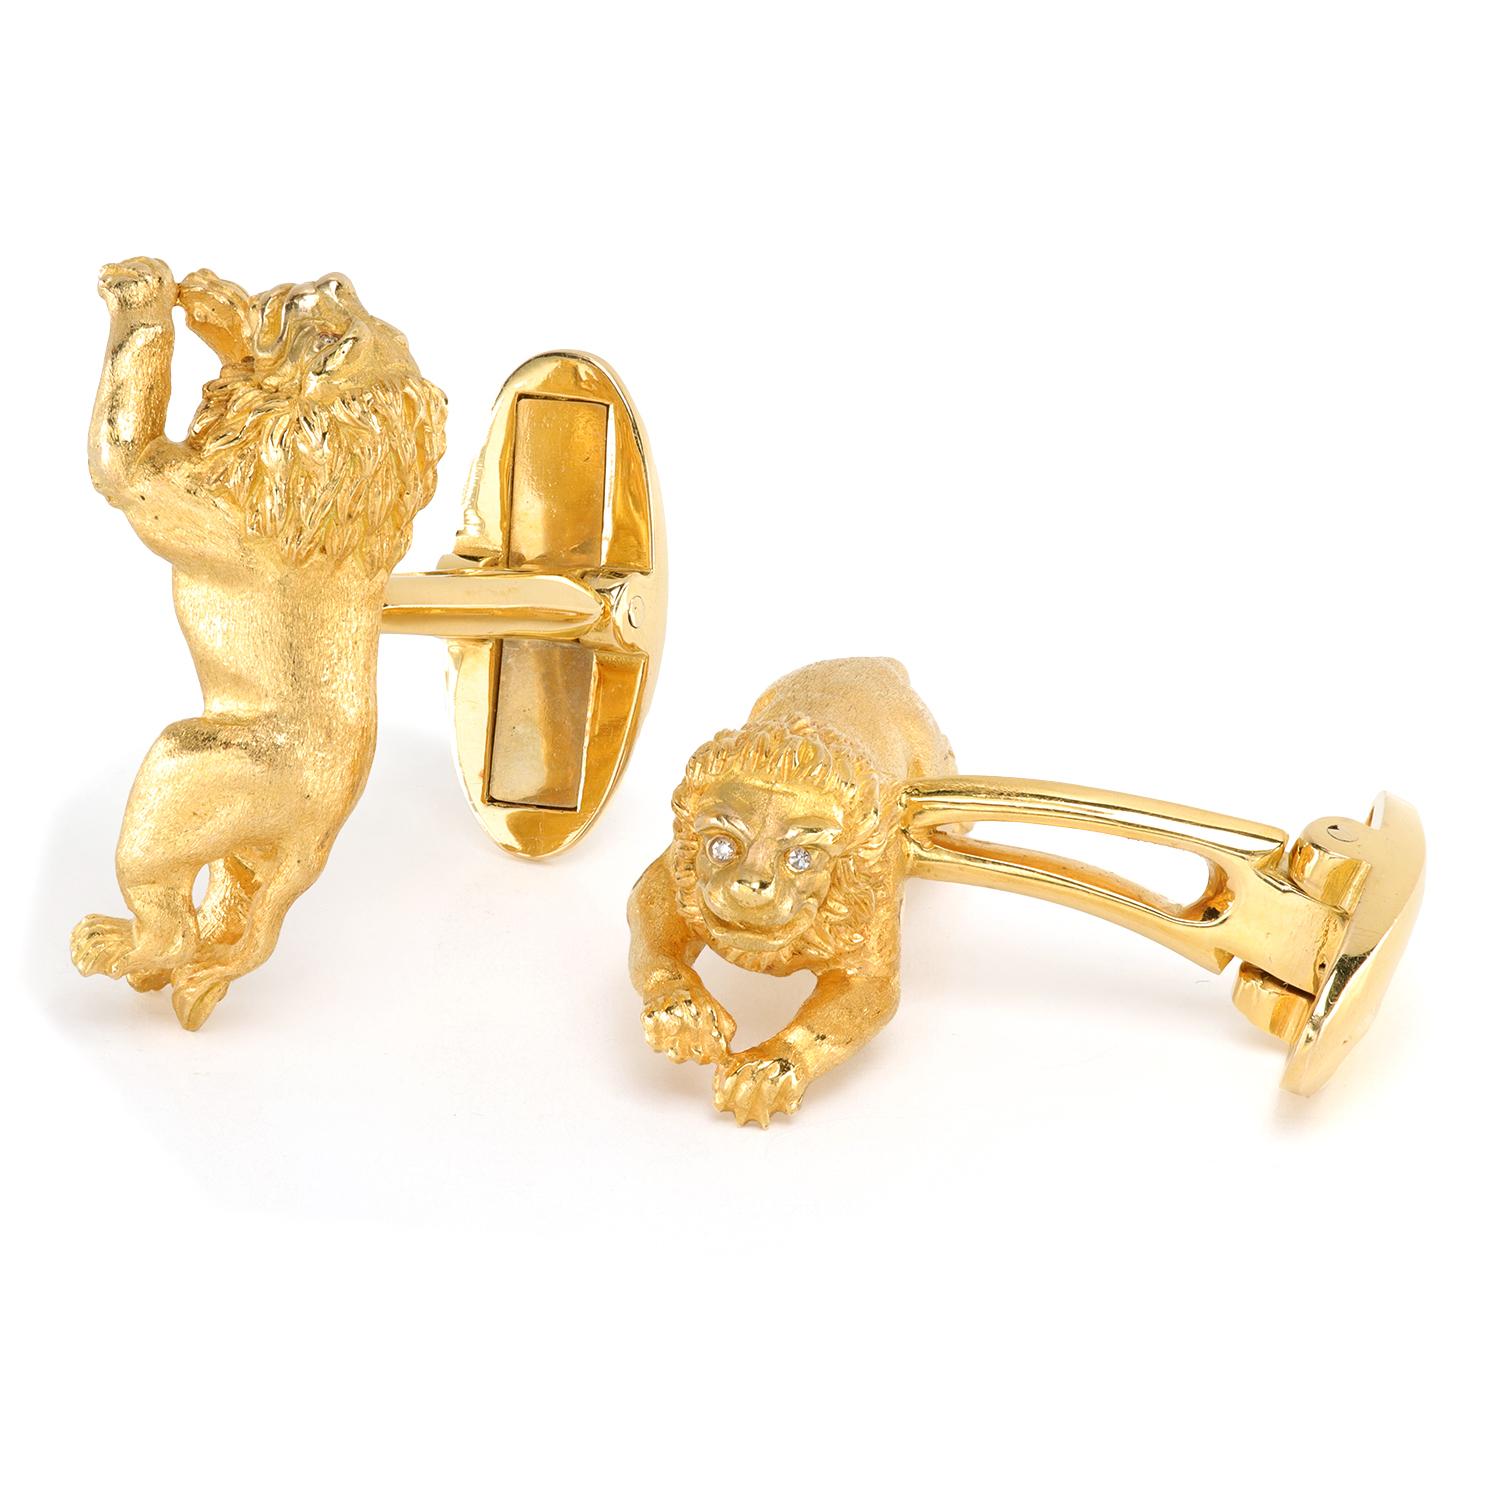 Round Cut Vintage 18k Yellow Gold Sculptured One-of-a-kind Cufflinks with Diamond Eyes For Sale